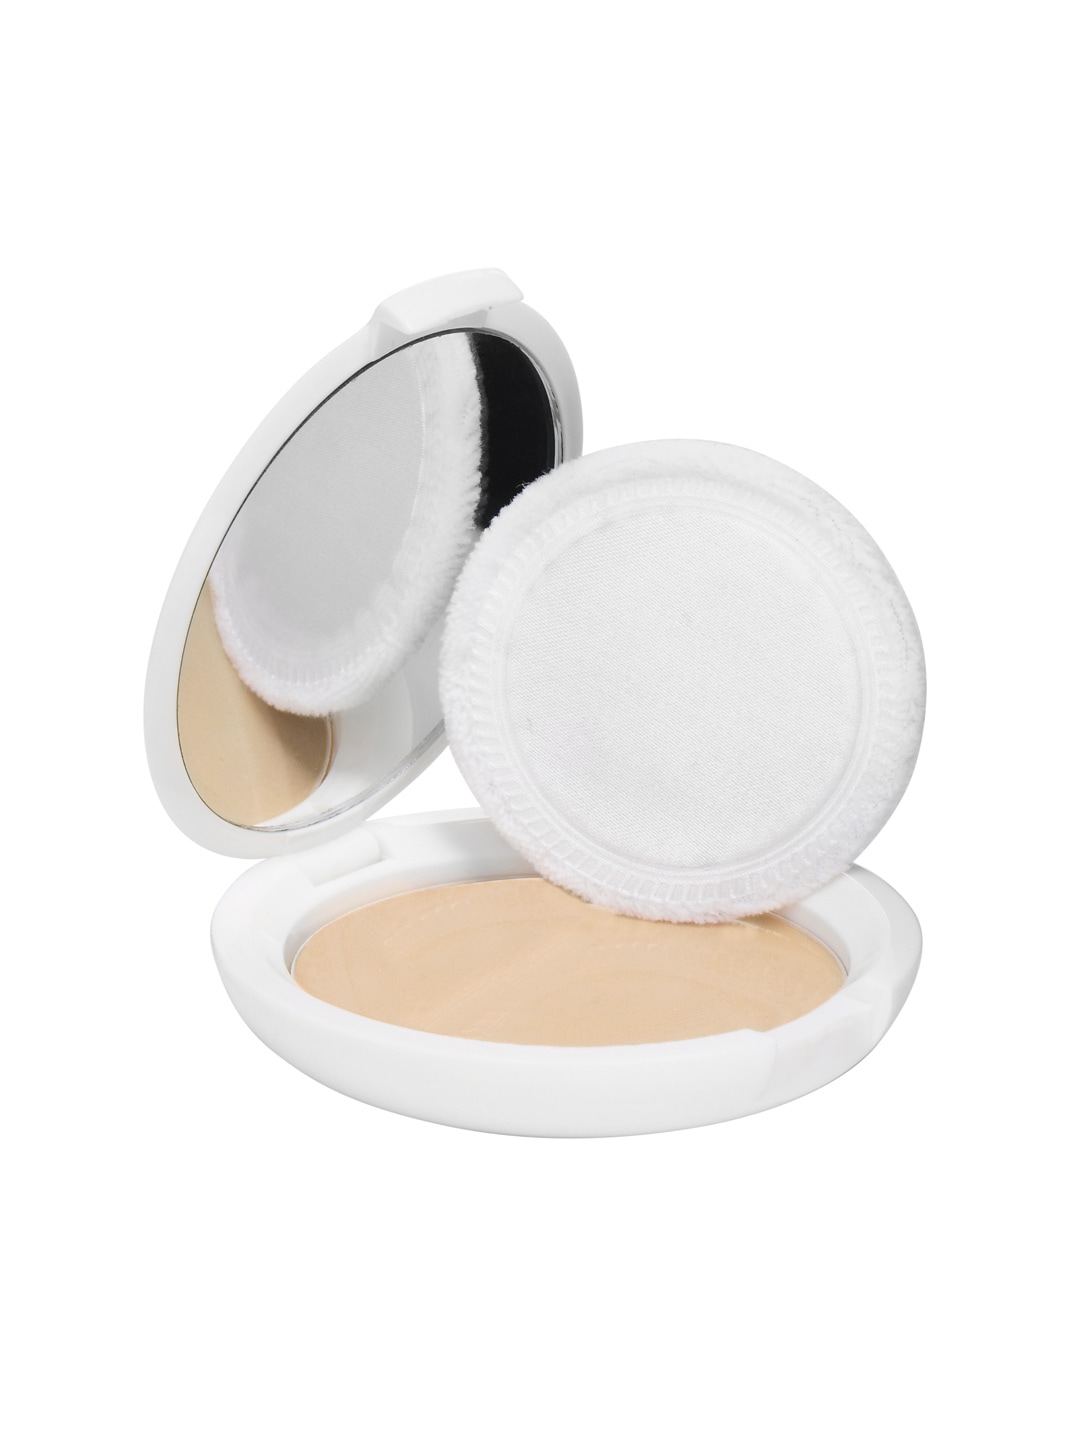 Colorbar Radiant White UV Fairness Sandy Nude Compact 003